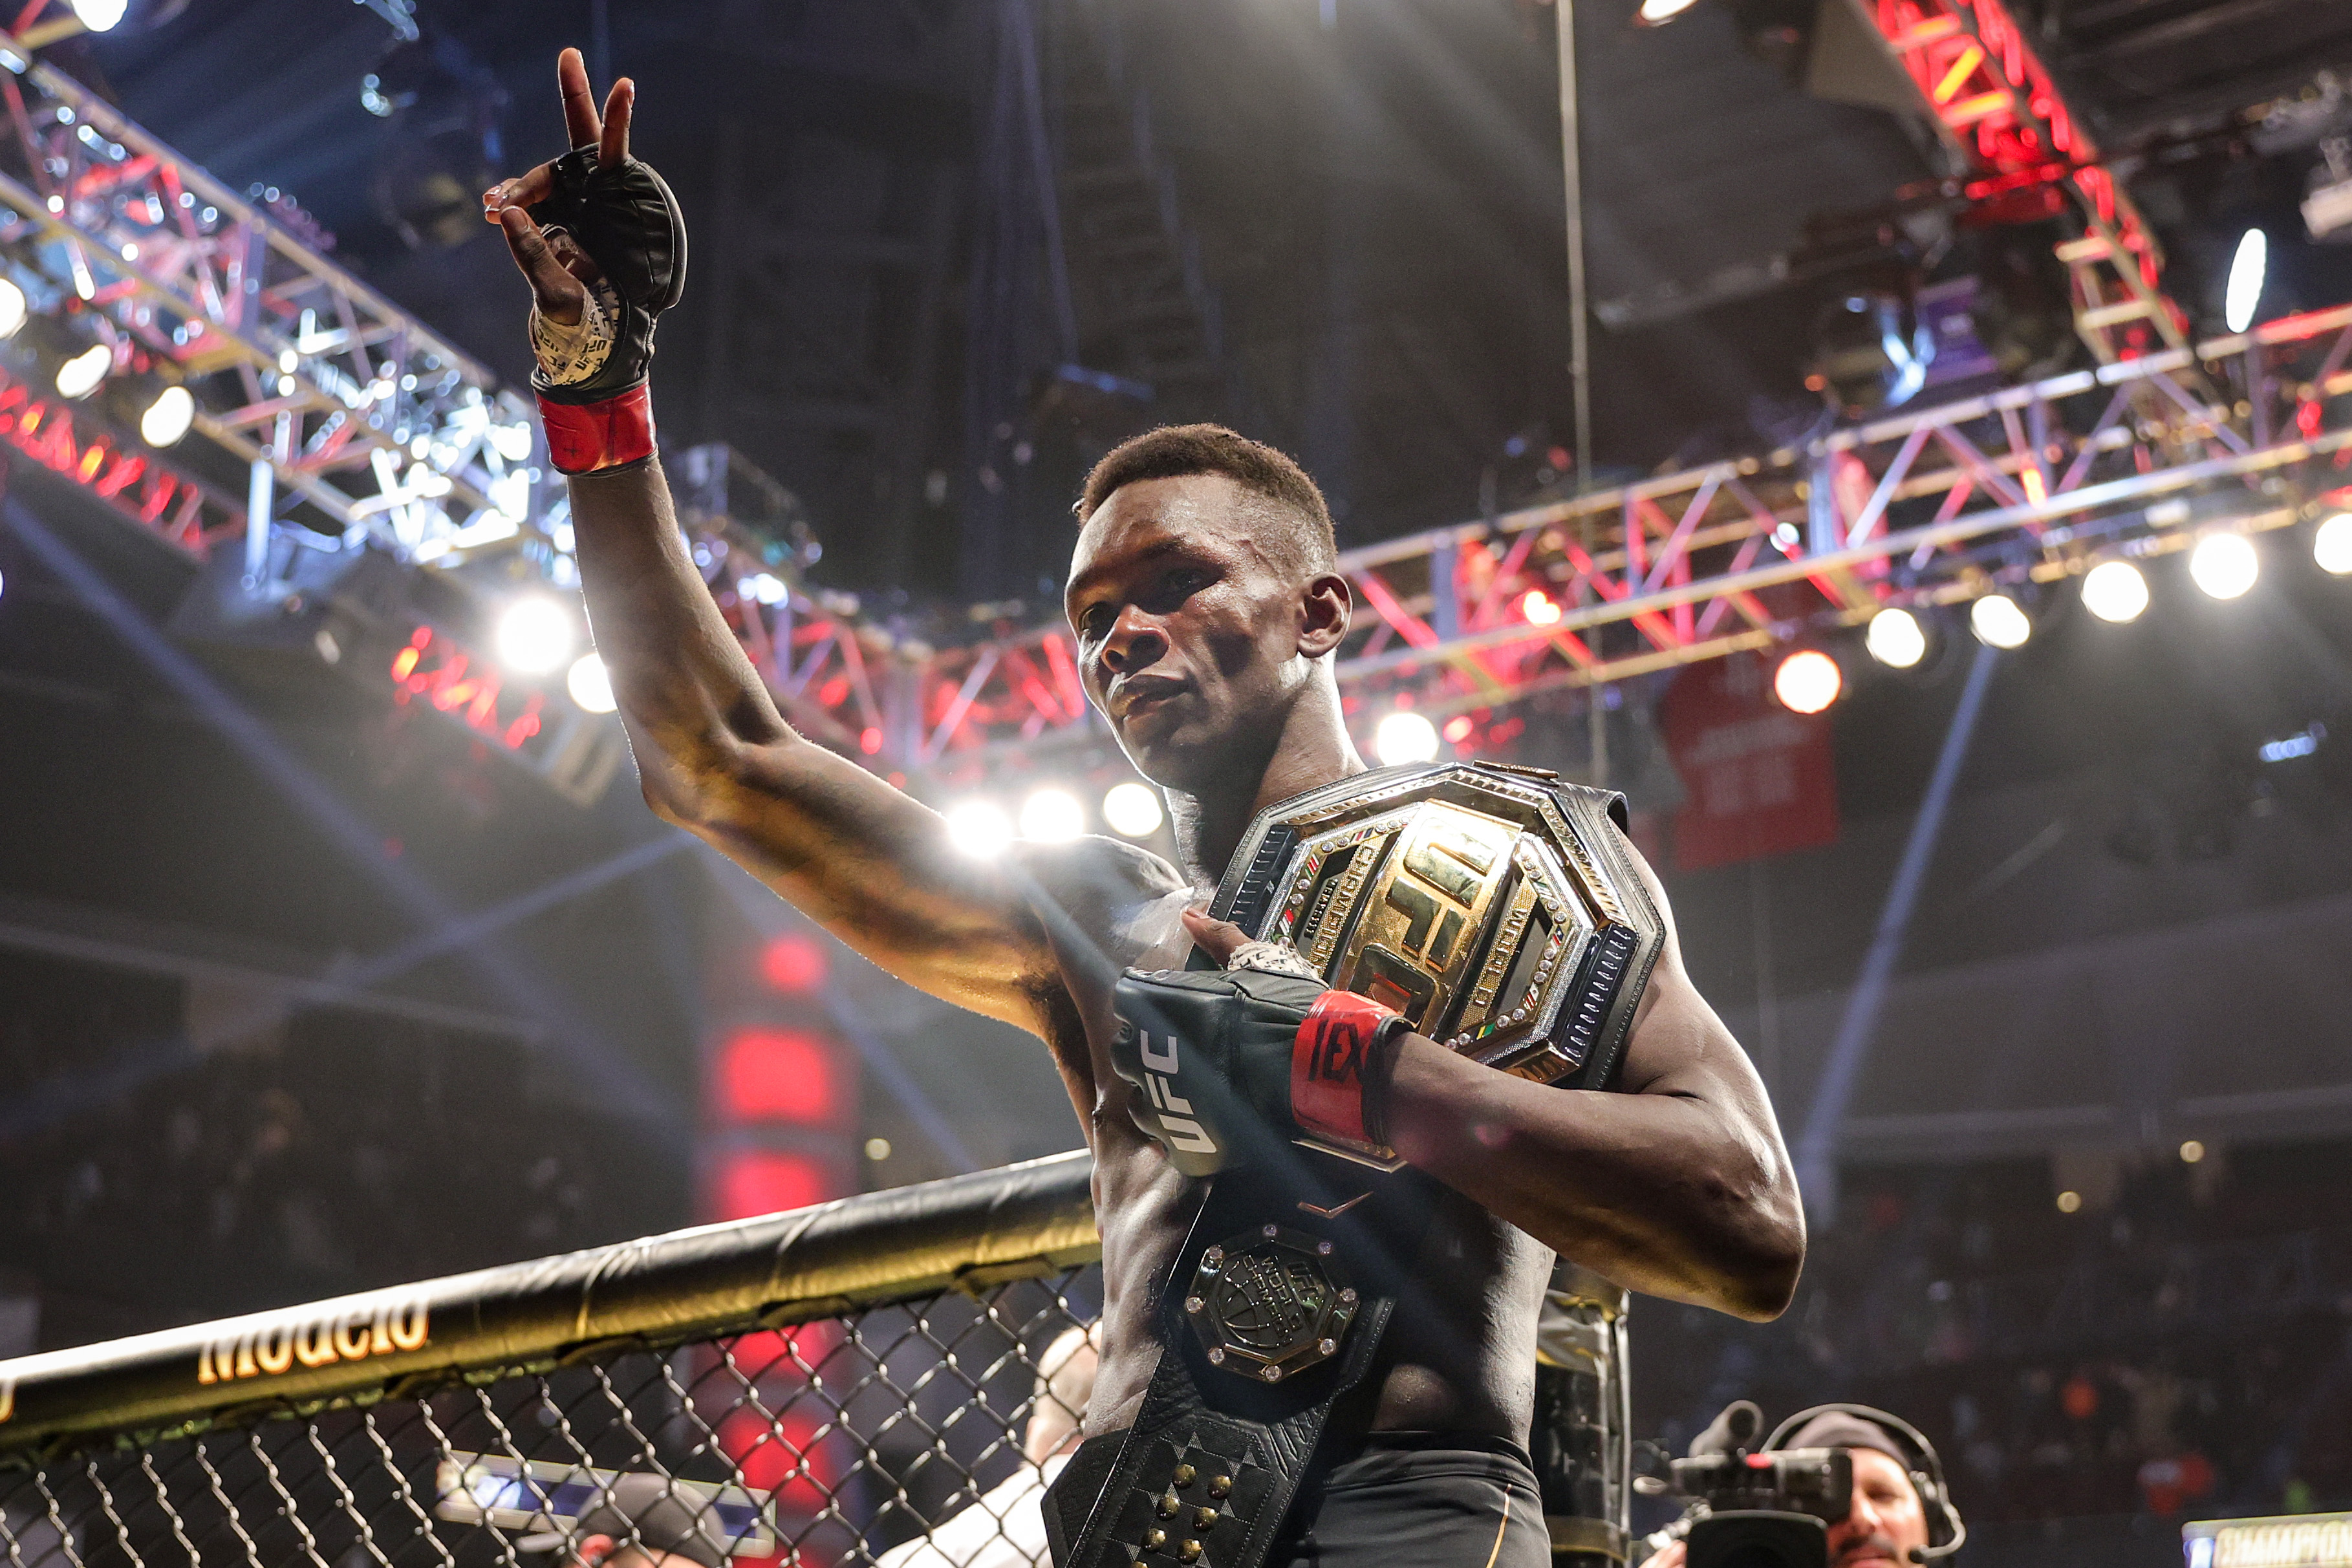 Israel Adesanya of Nigeria celebrates after defending his middleweight championship against Robert Whittaker of Australia during UFC 271 at Toyota Center on February 12, 2022 in Houston, Texas.